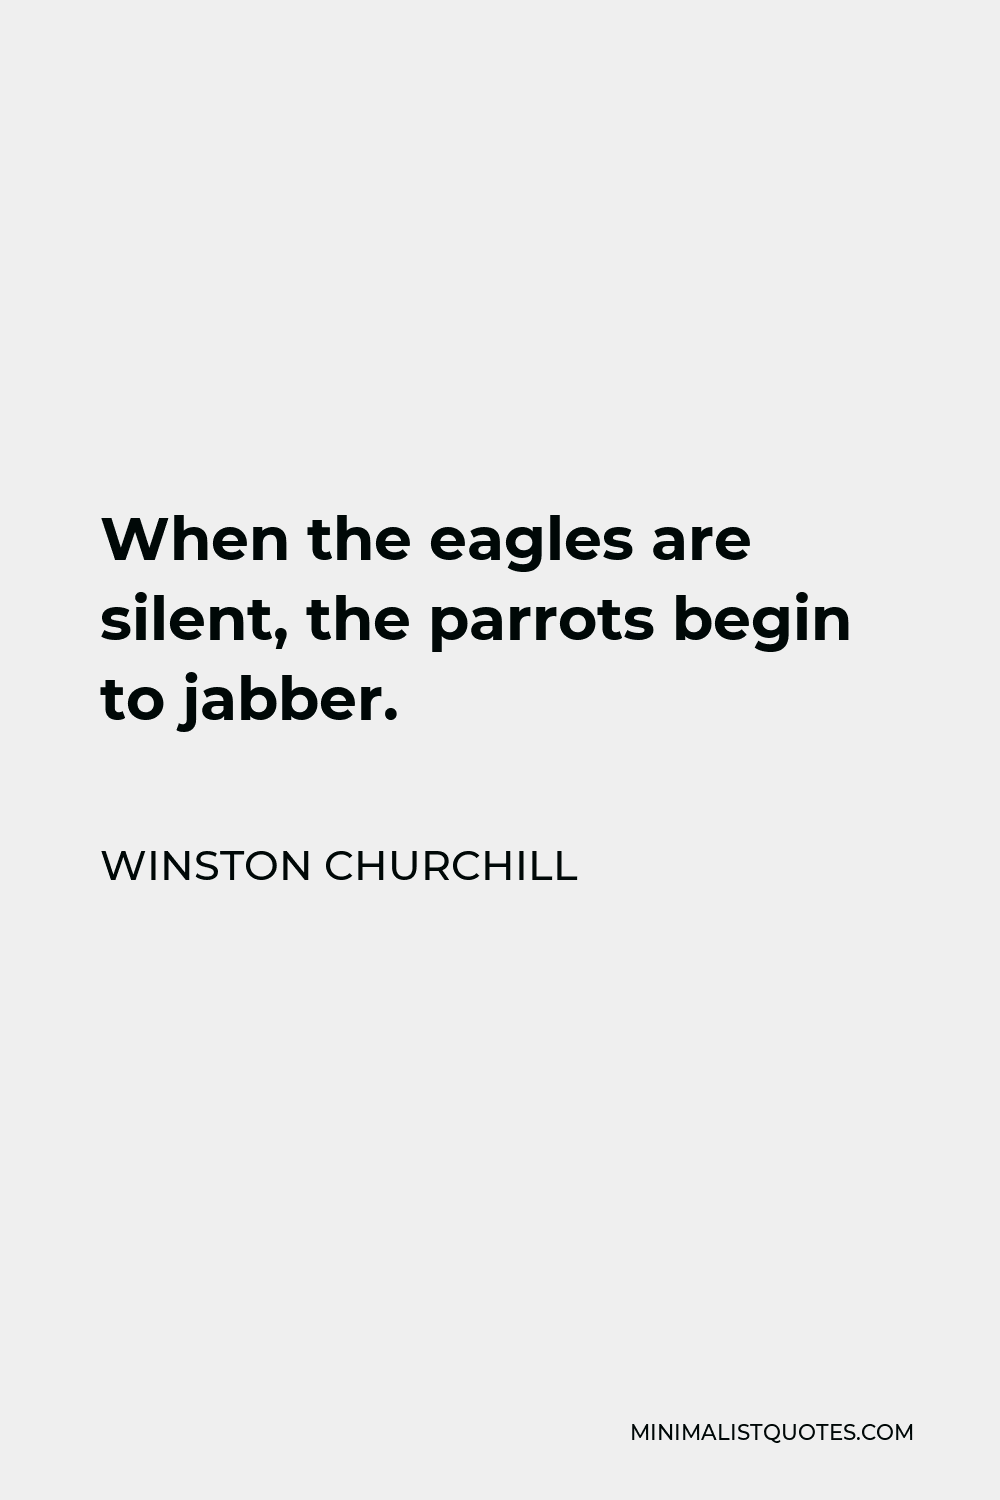 Winston Churchill Quote - When the eagles are silent, the parrots begin to jabber.